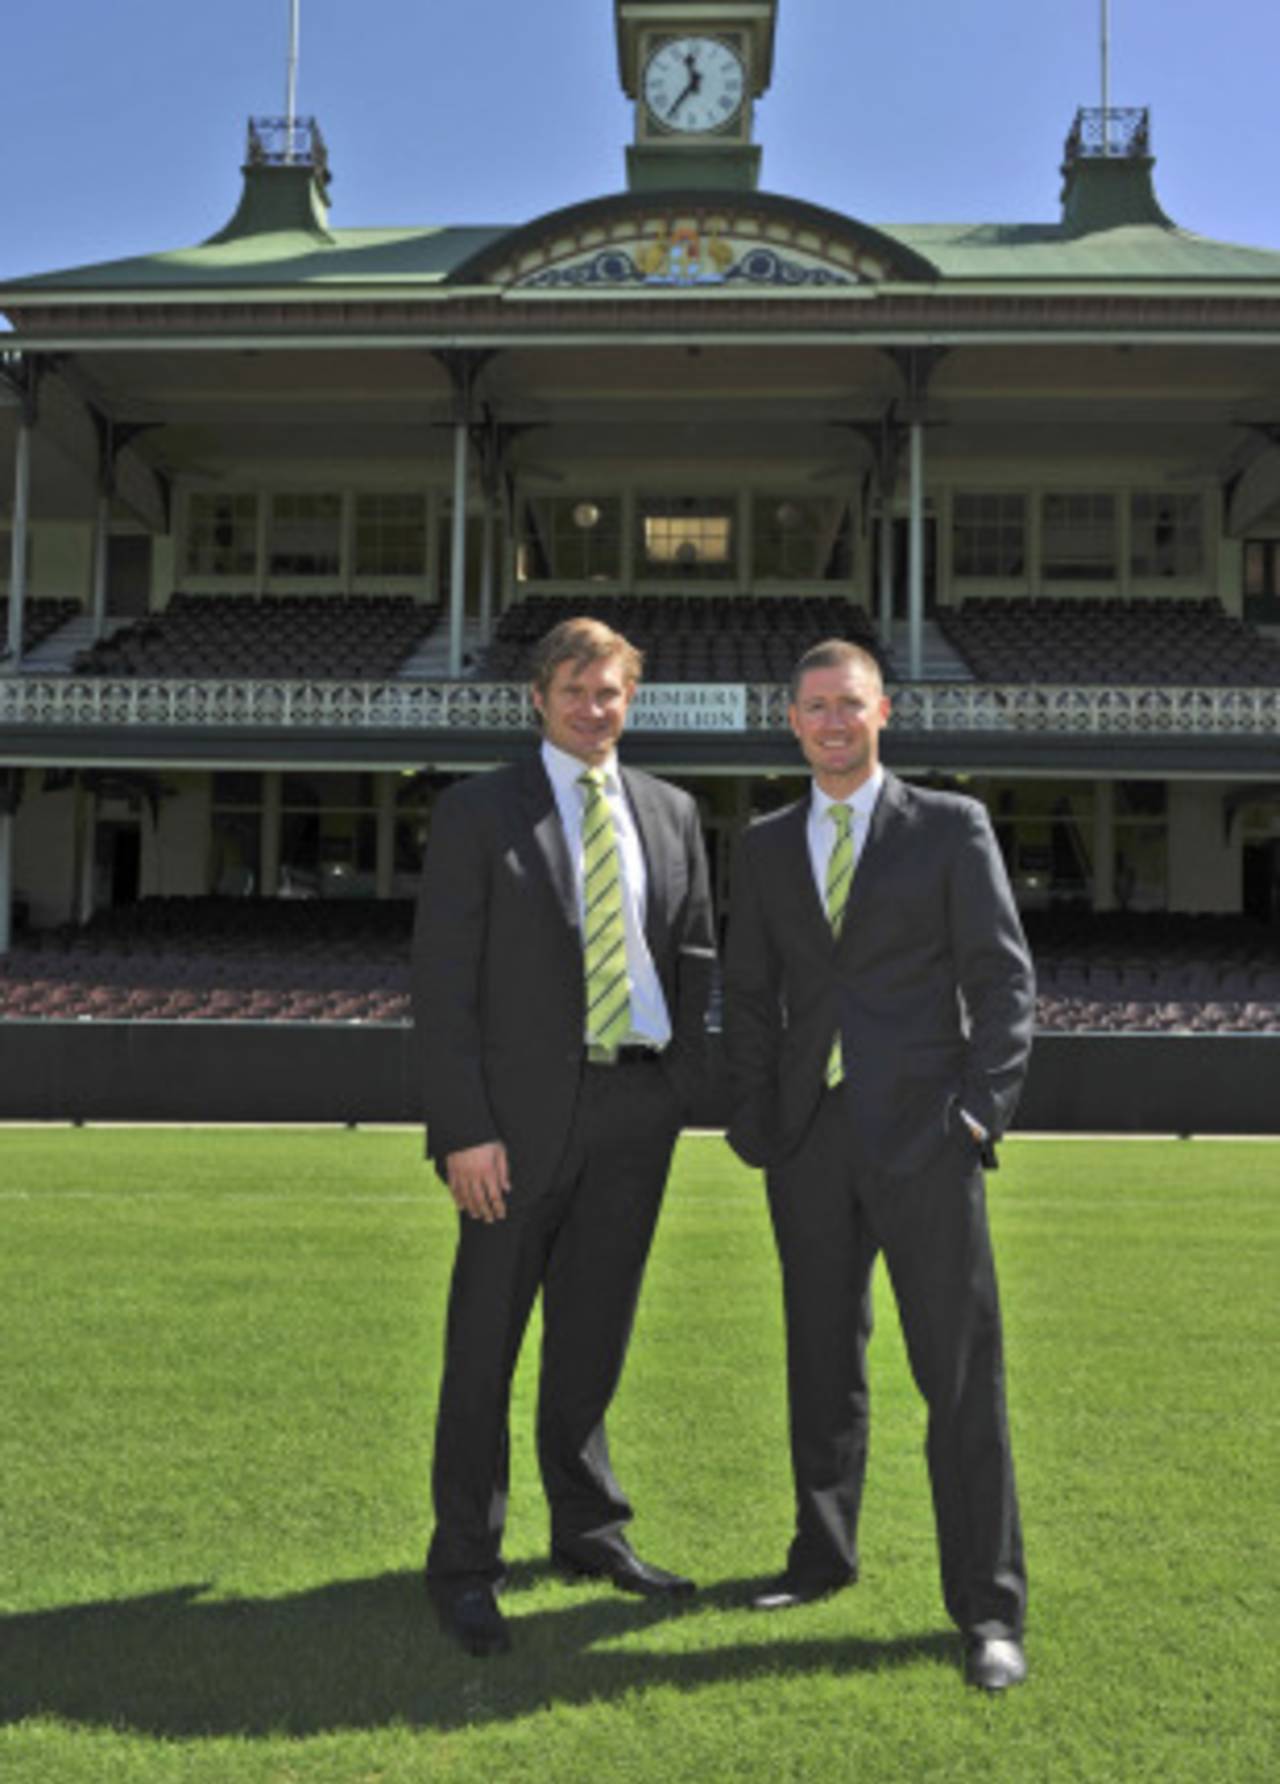 Newly named Australia vice-captain and captain, Shane Watson and Michael Clarke, at the SCG, Sydney, March 30, 2011